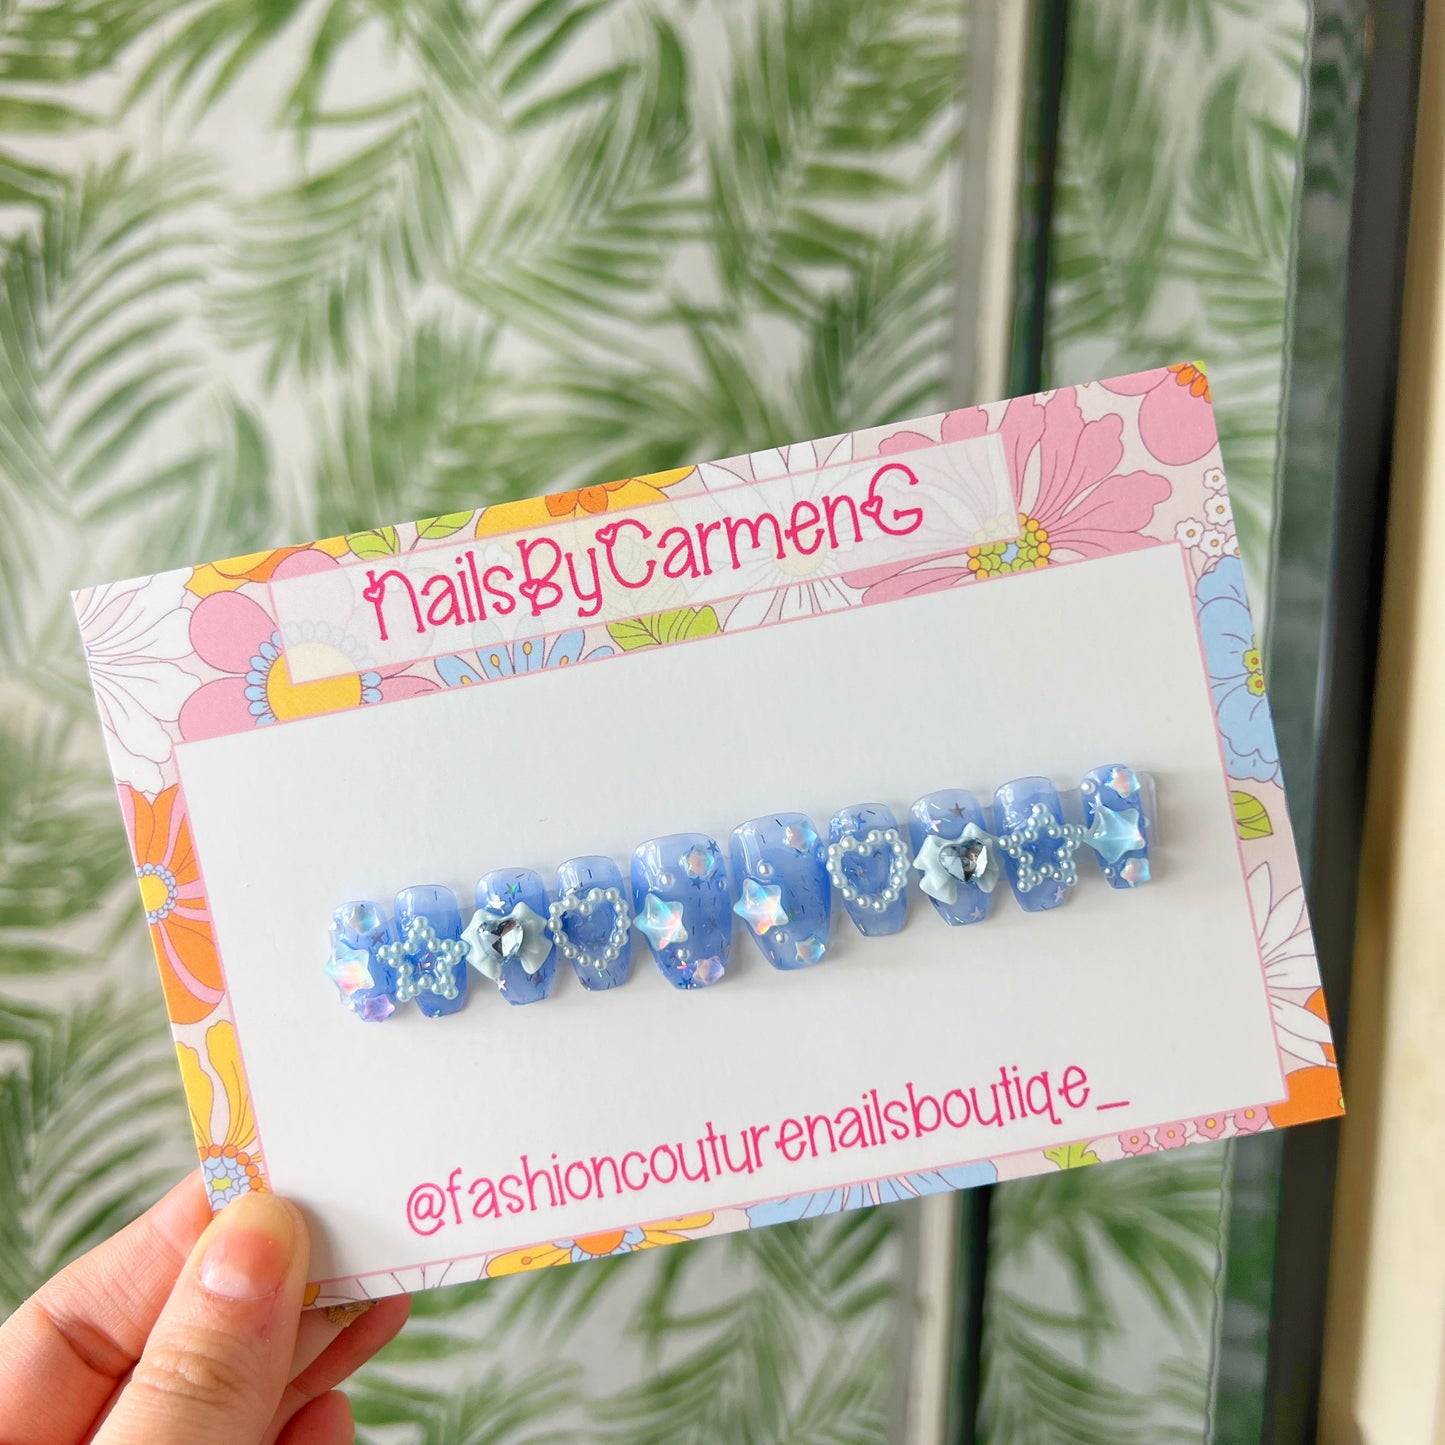 Blue jelly Charms Acrylic Press on nails